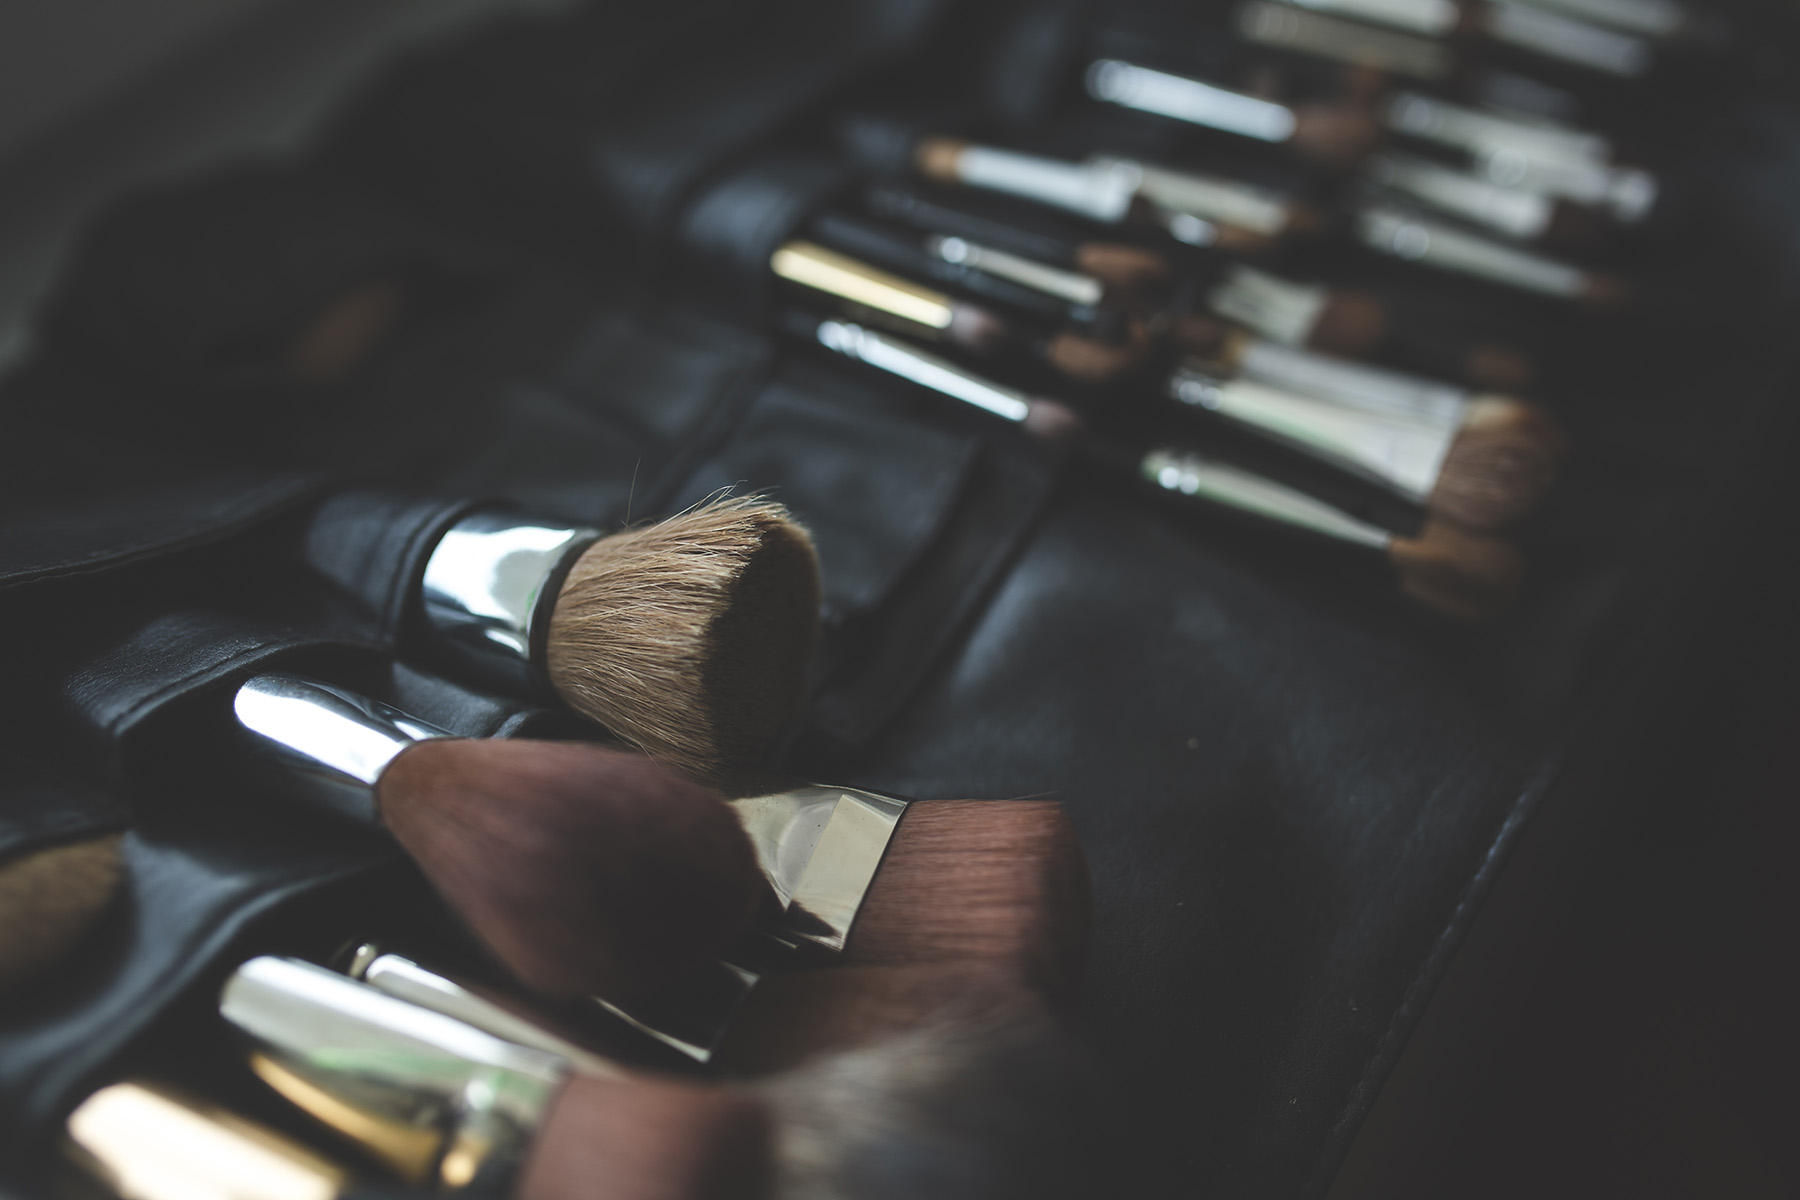 5 Important Things You Need to Know When Using Makeup Brushes